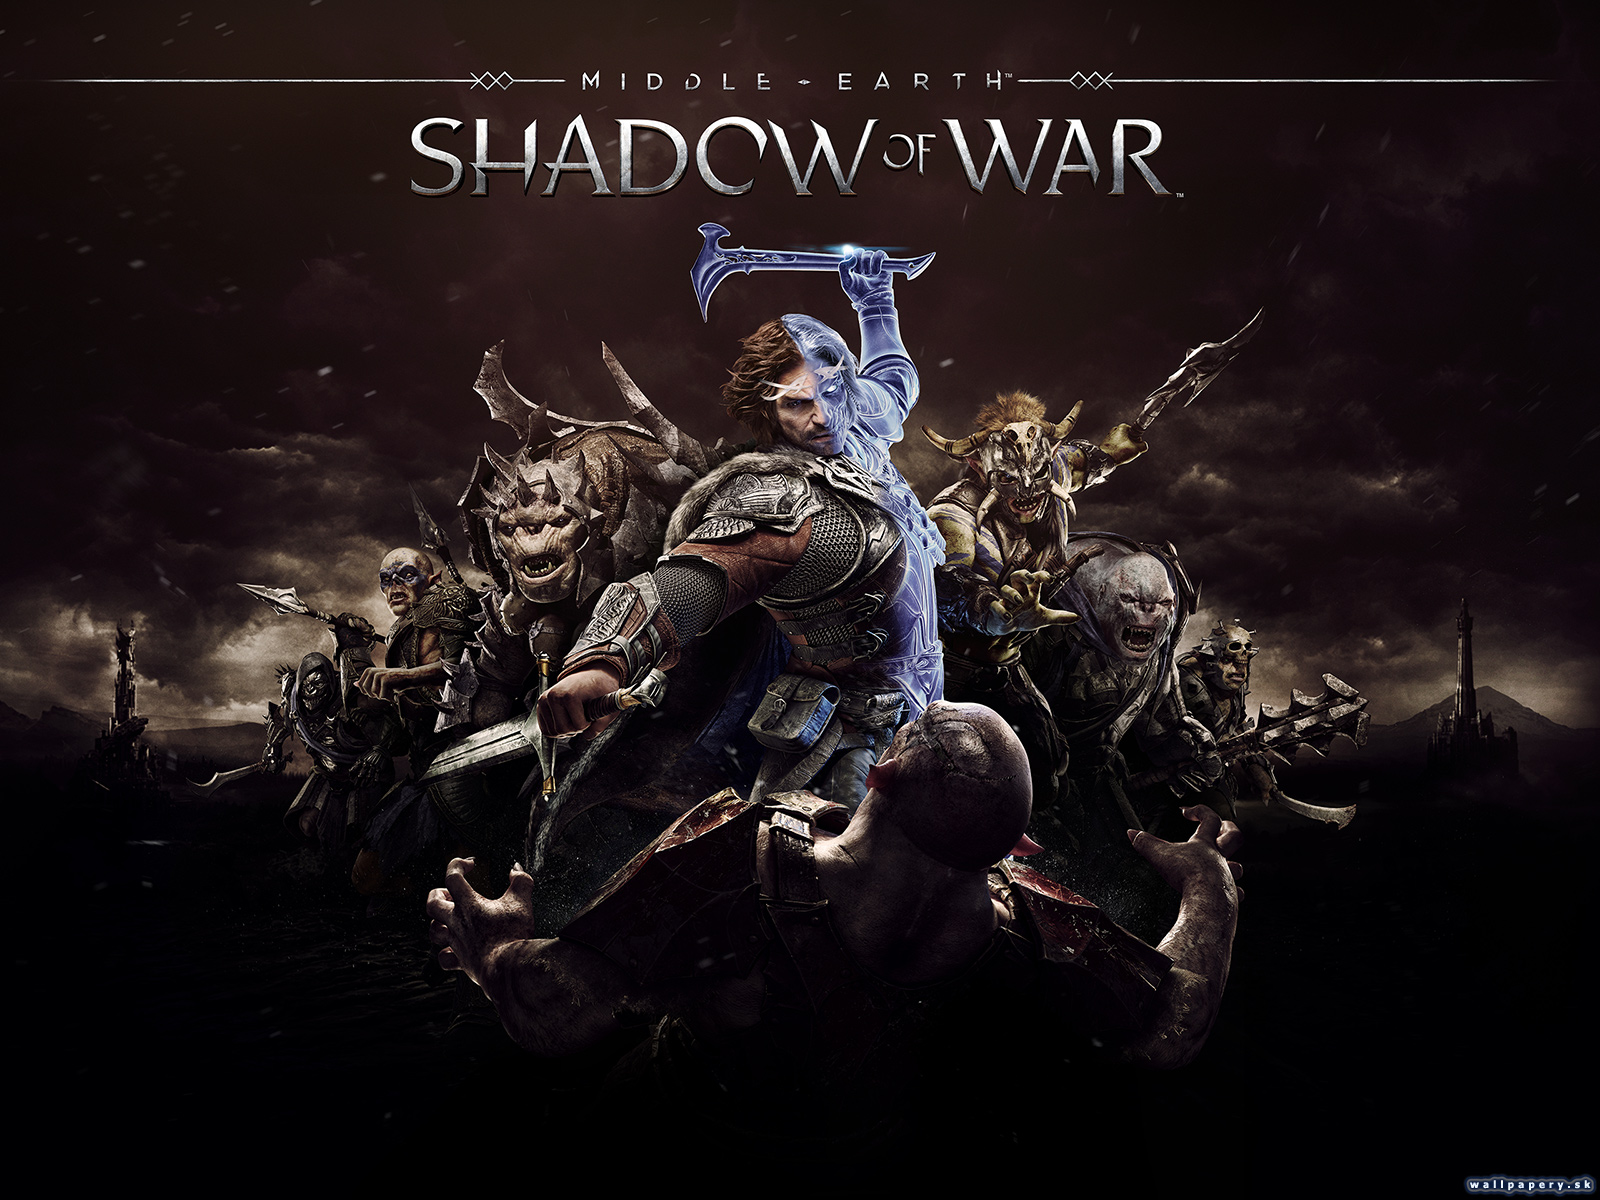 Middle-Earth: Shadow of War - wallpaper 1